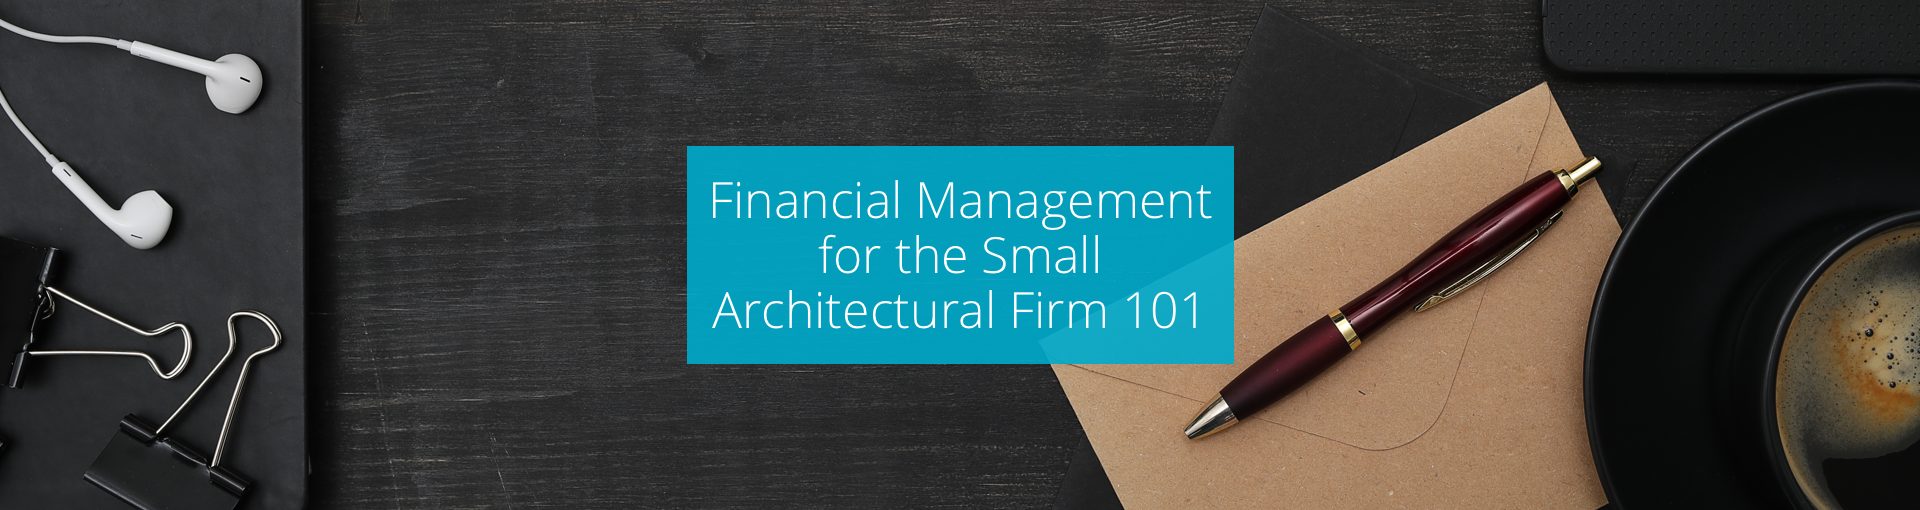 Financial Management for the Small Architectural Firm 101 Featured Image